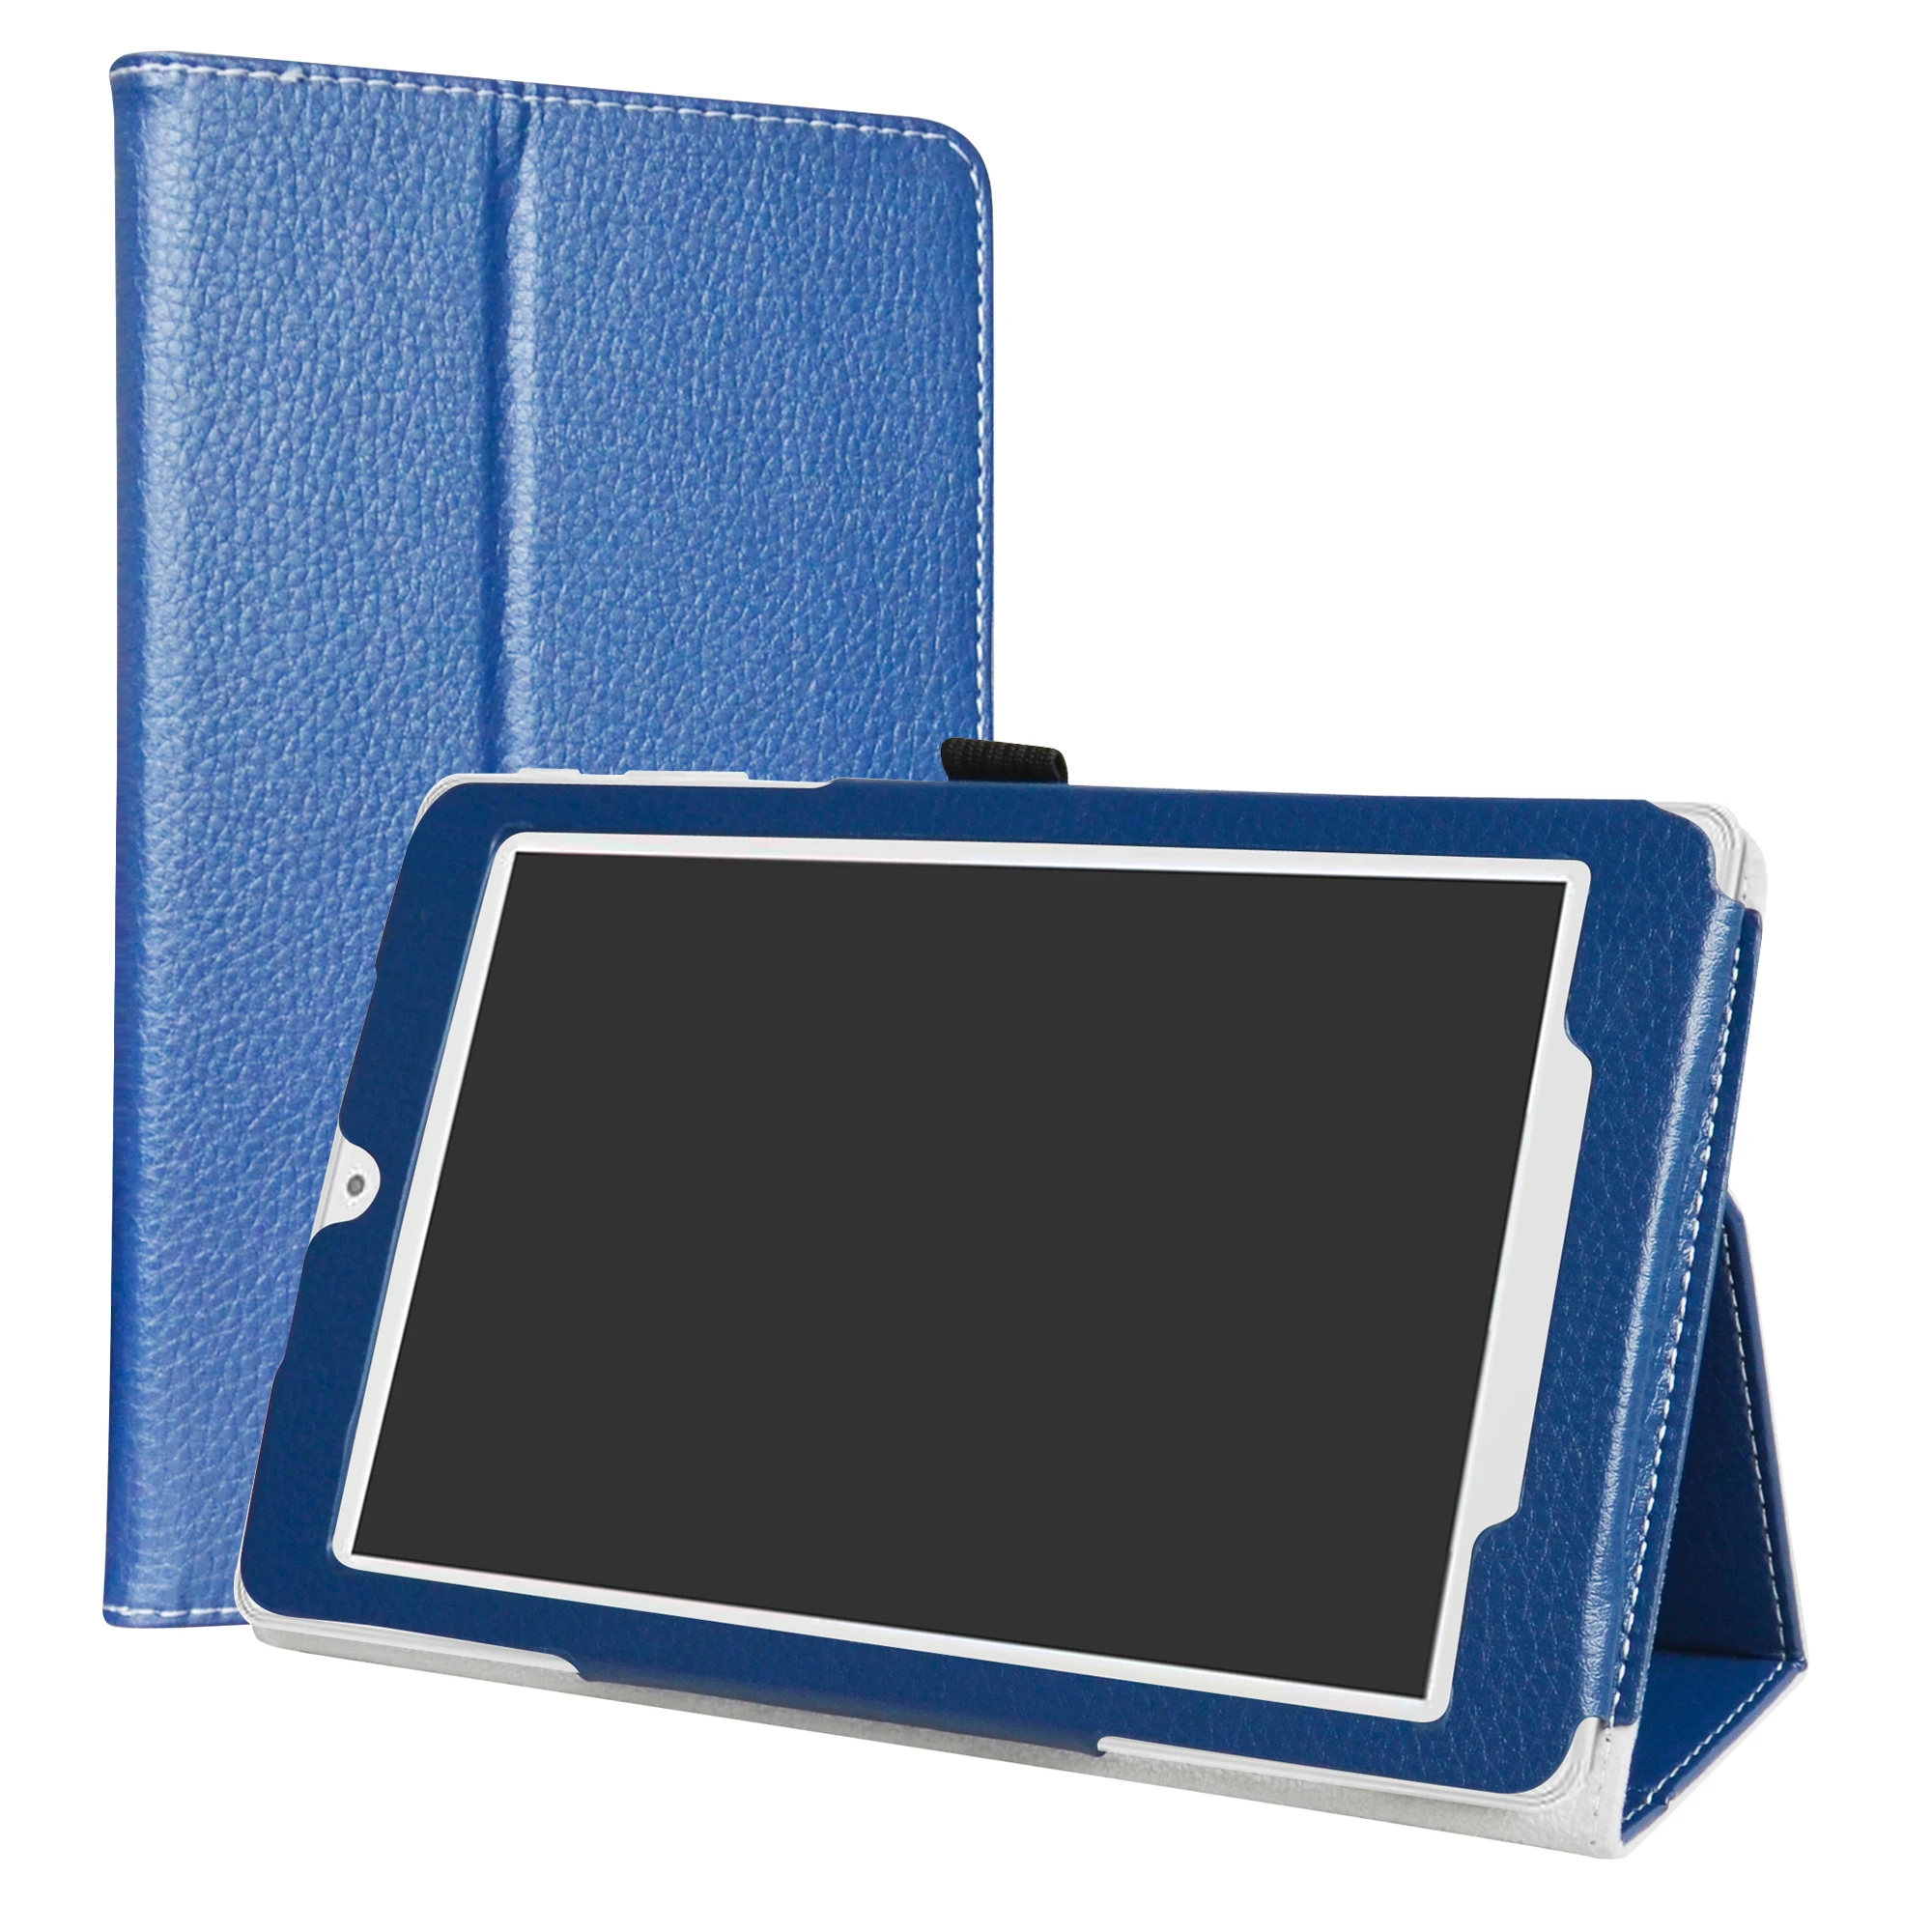 Case For 8" Alcatel OneTouch Pixi 3 8 3G  Tablet Folding Stand PU Leather Cover with Magnetic Closure